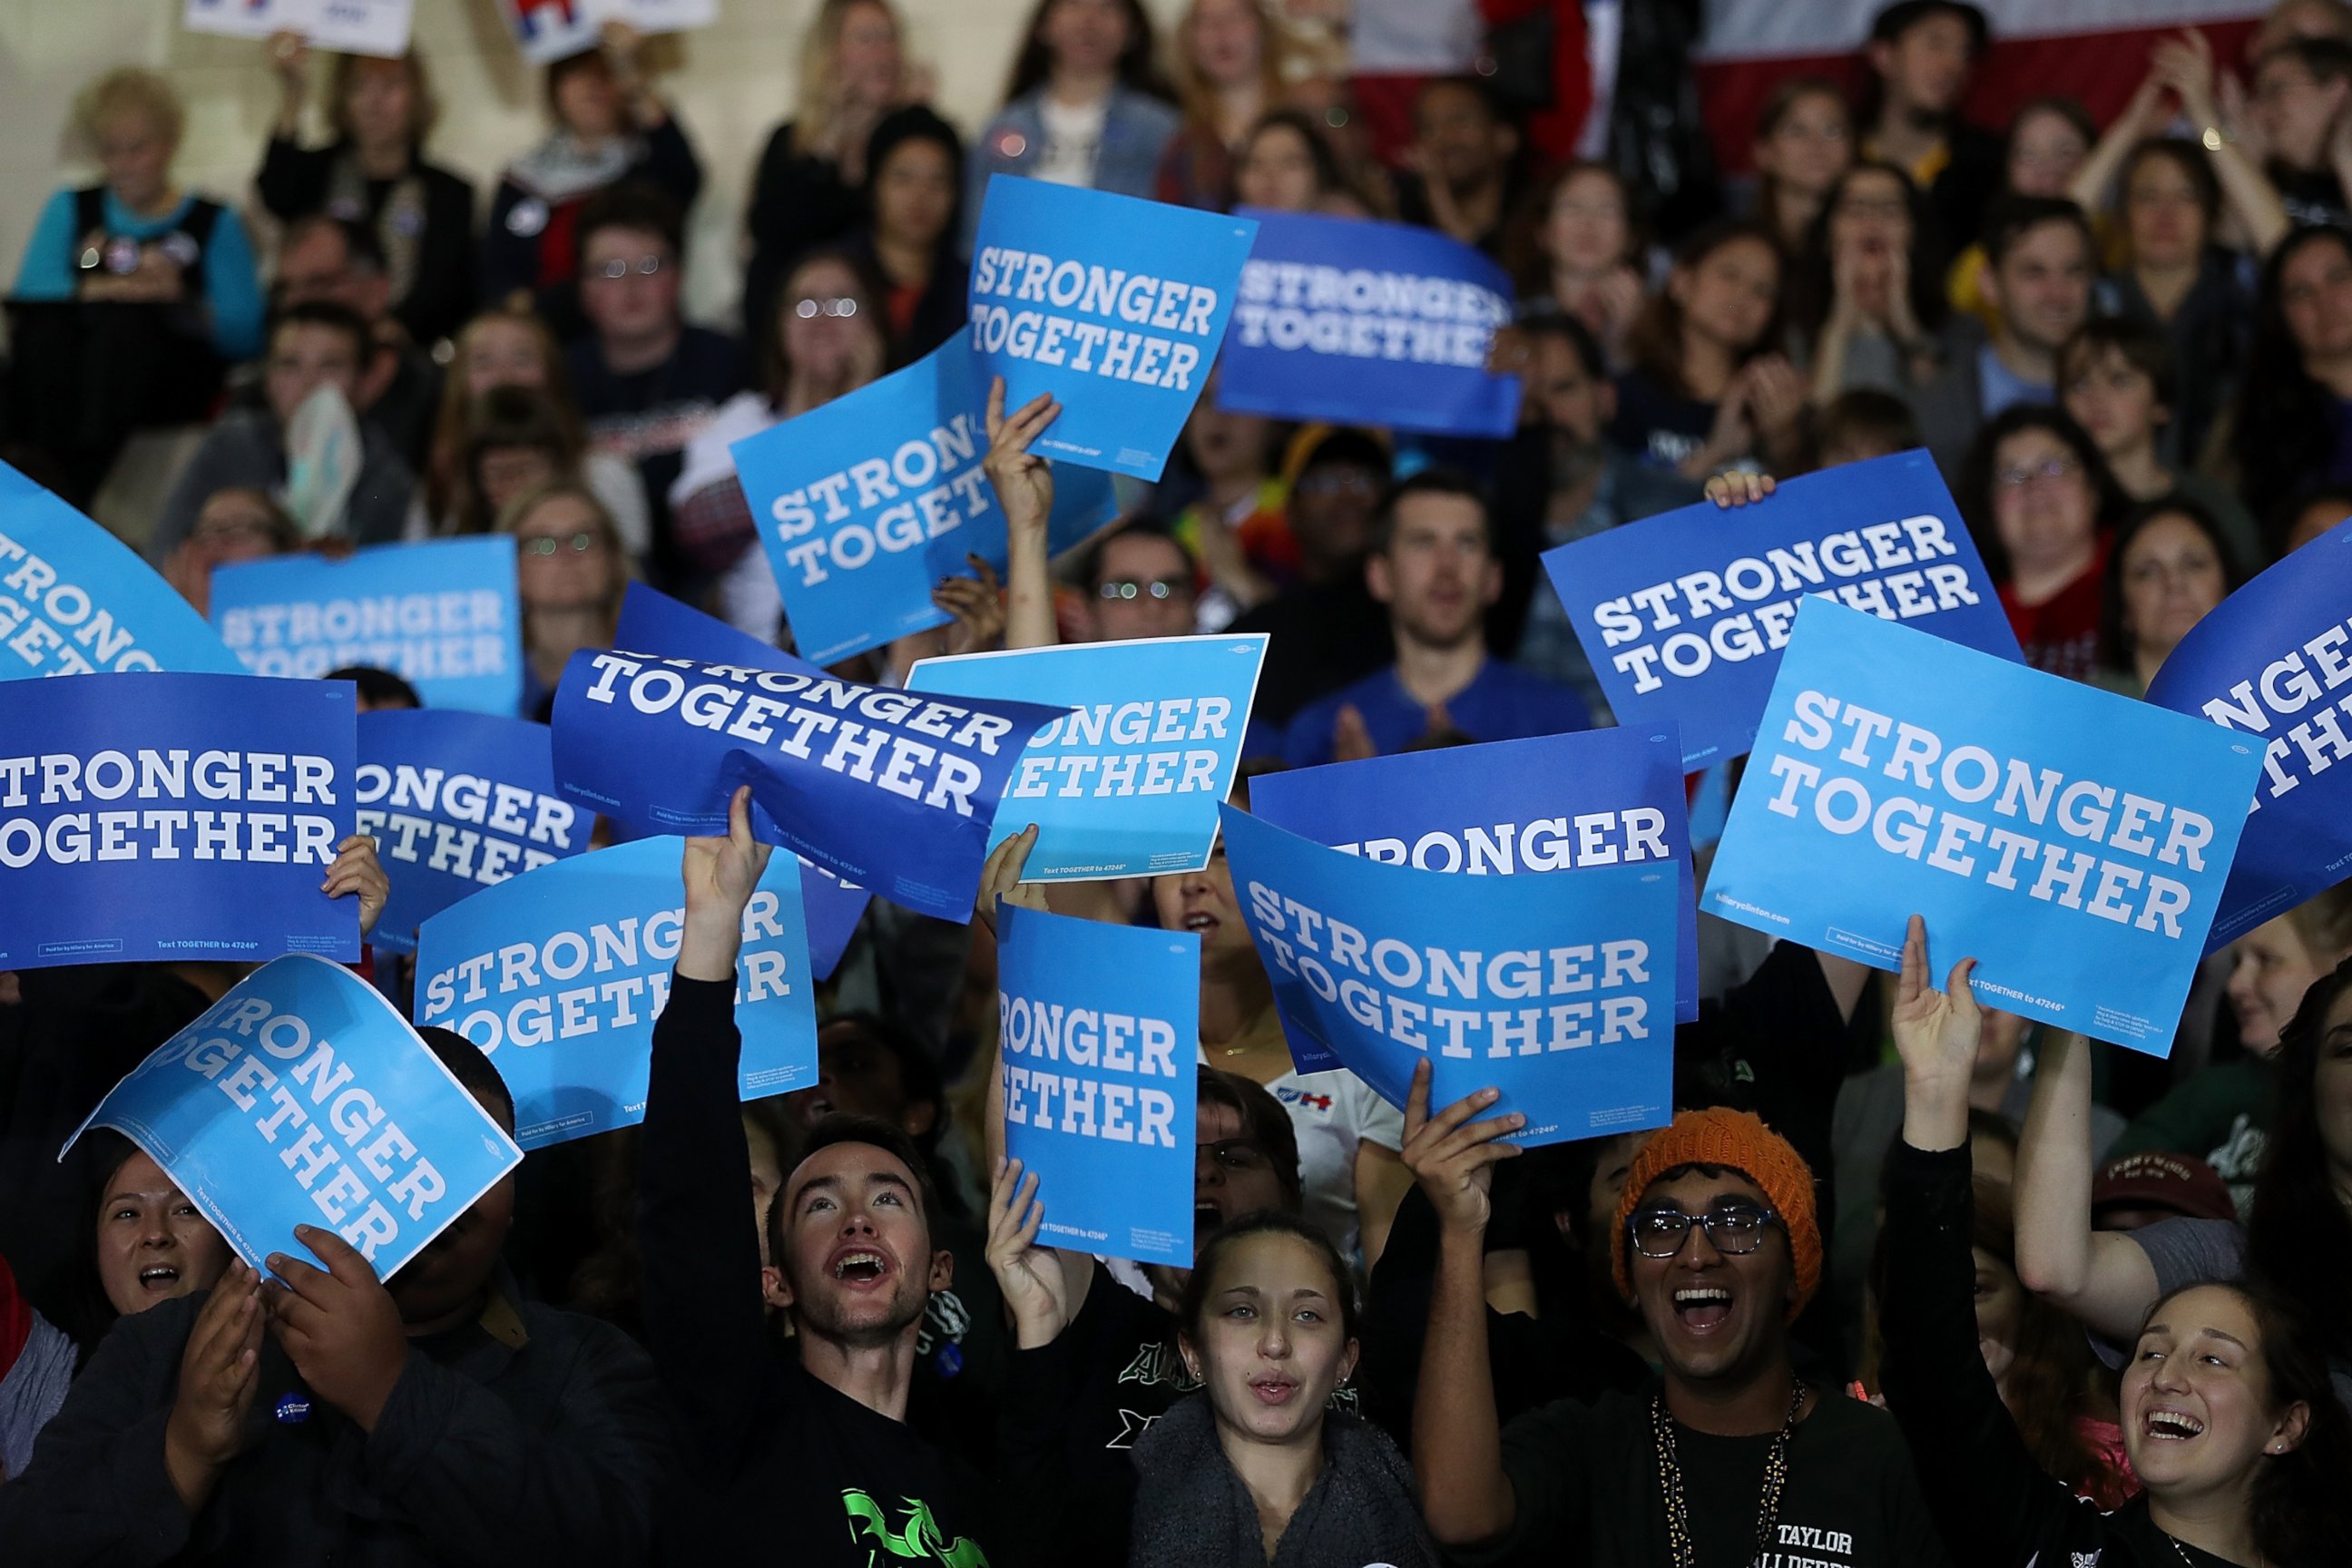 PHOTO: Supporters hold signs as democratic presidential nominee former Secretary of State Hillary Clinton speaks during a campaign rally at Taylor Allderdice High School, Oct. 22, 2016 in Pittsburgh, Pennsylvania.